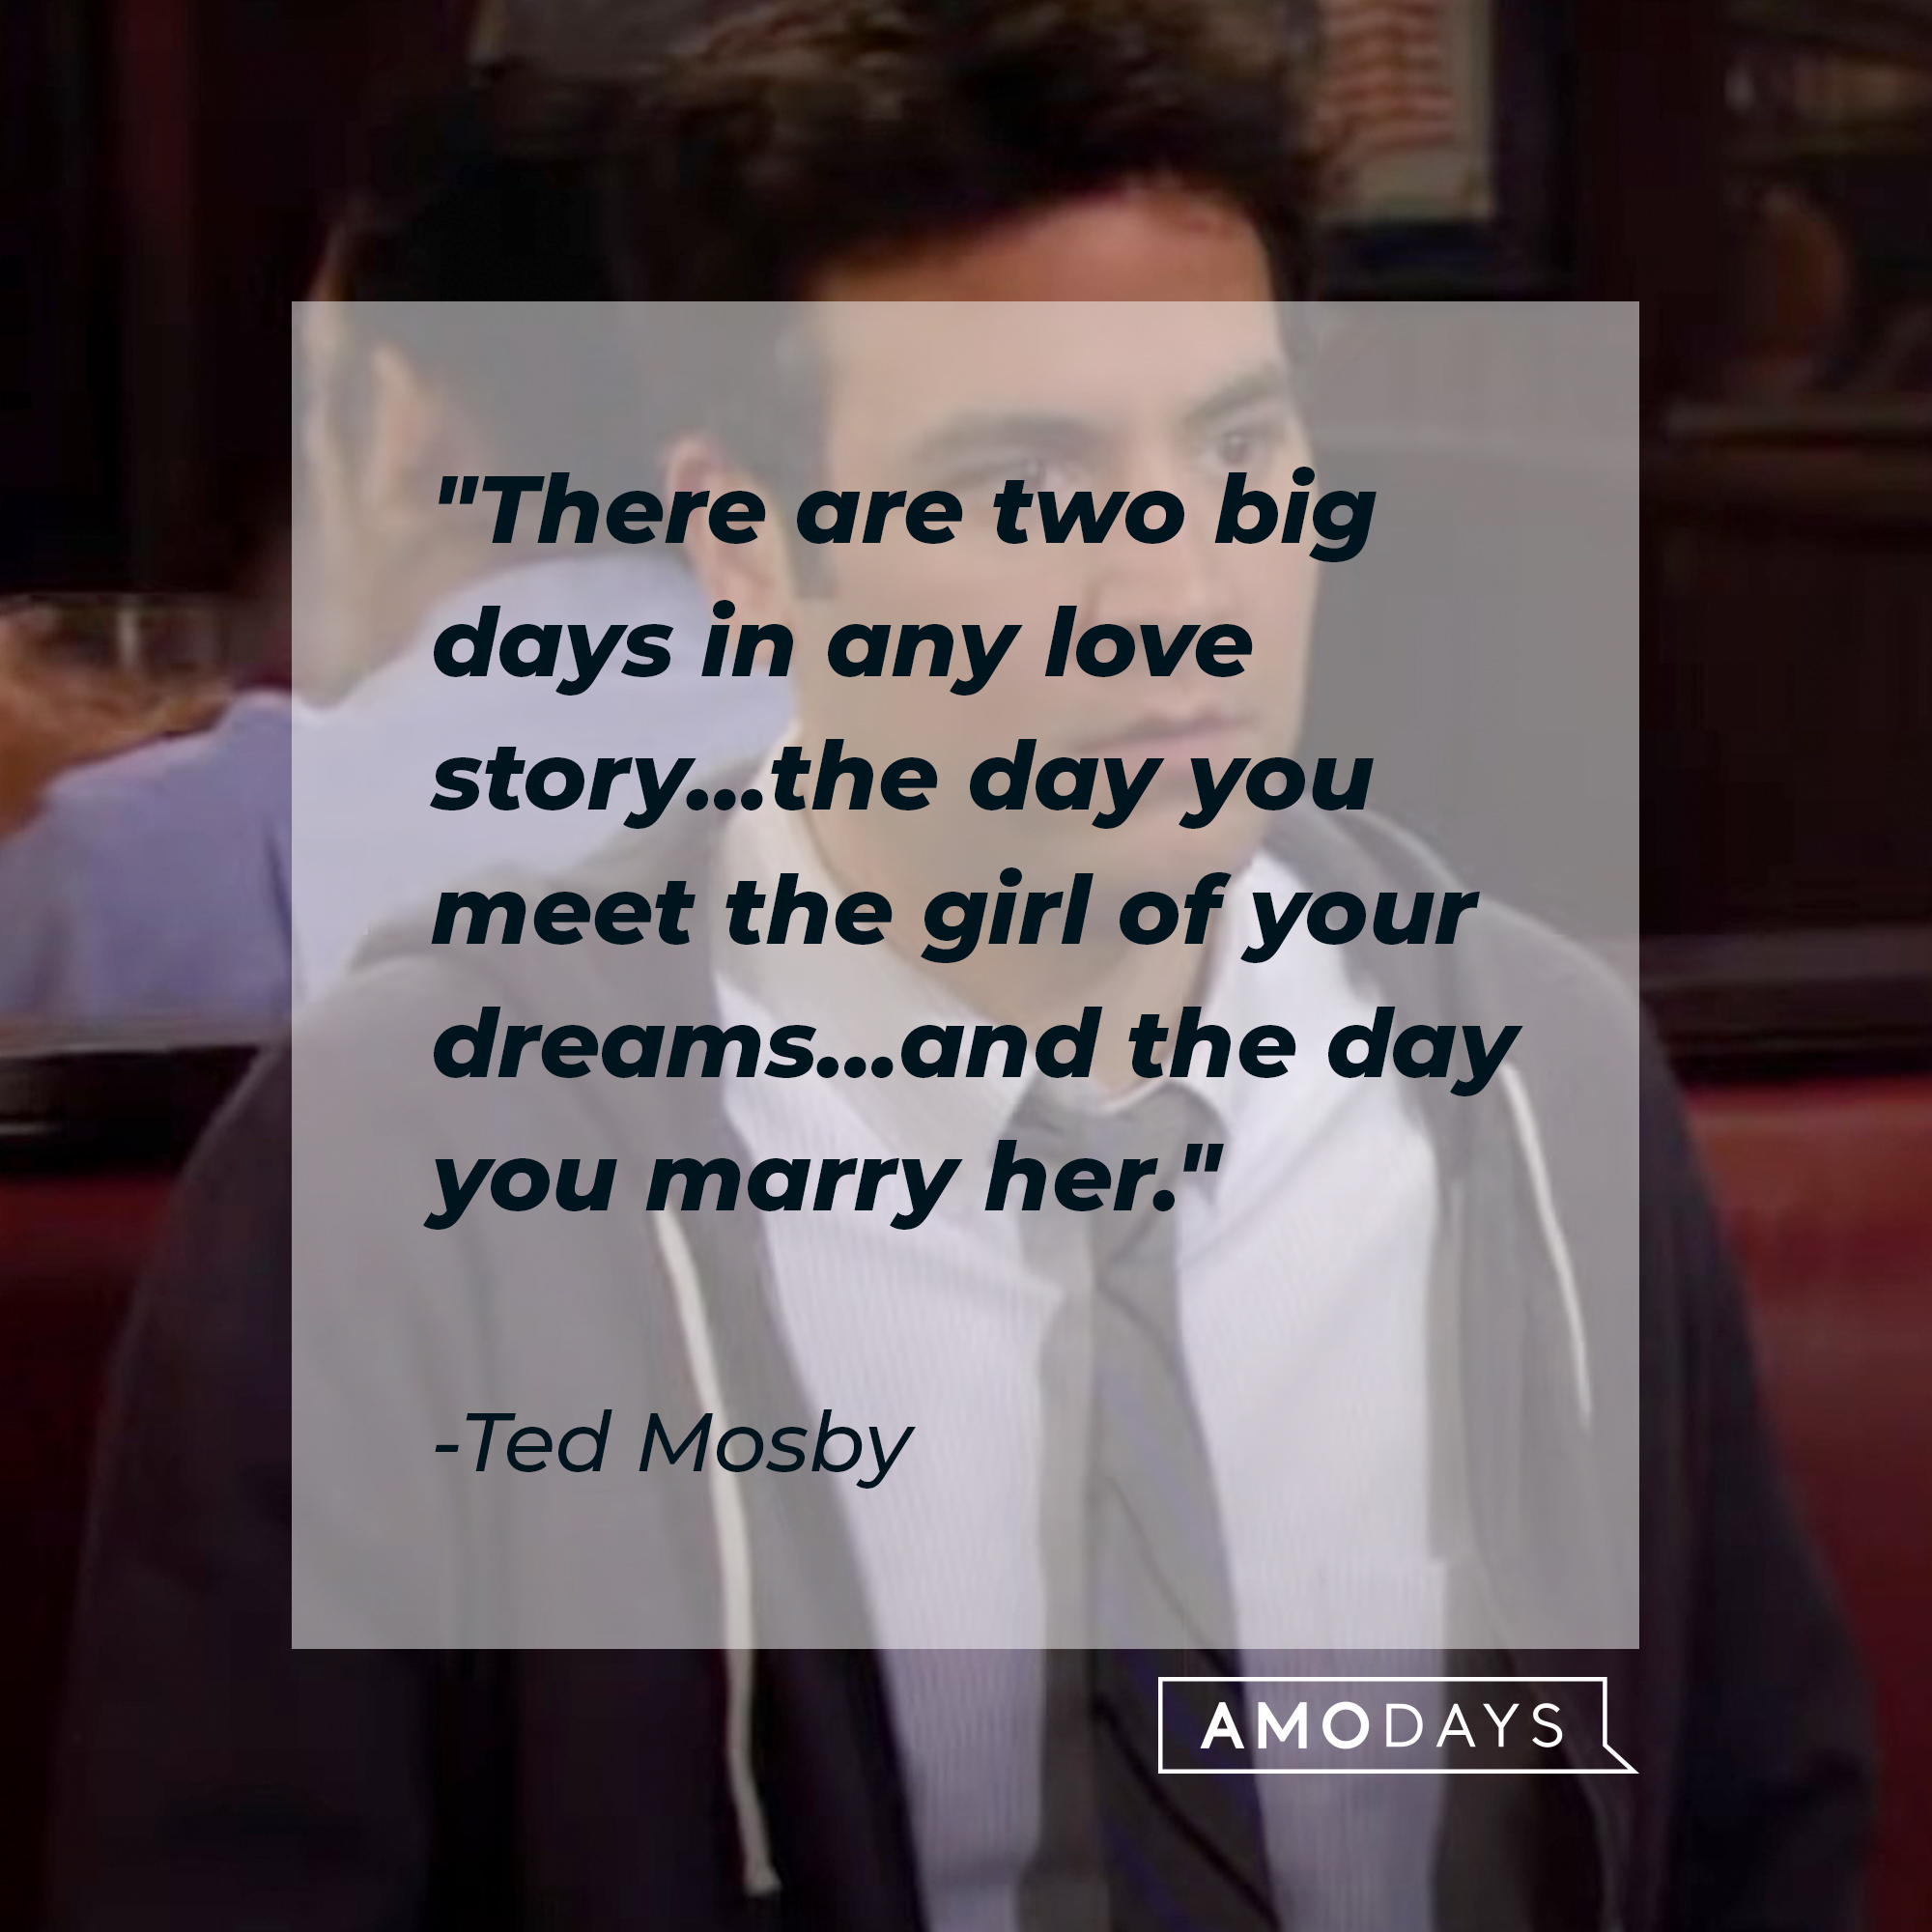 An image of Ted Mosby with his quote: "There are two big days in any love story…the day you meet the girl of your dreams…and the day you marry her." | Source: facebook.com/OfficialHowIMetYourMother